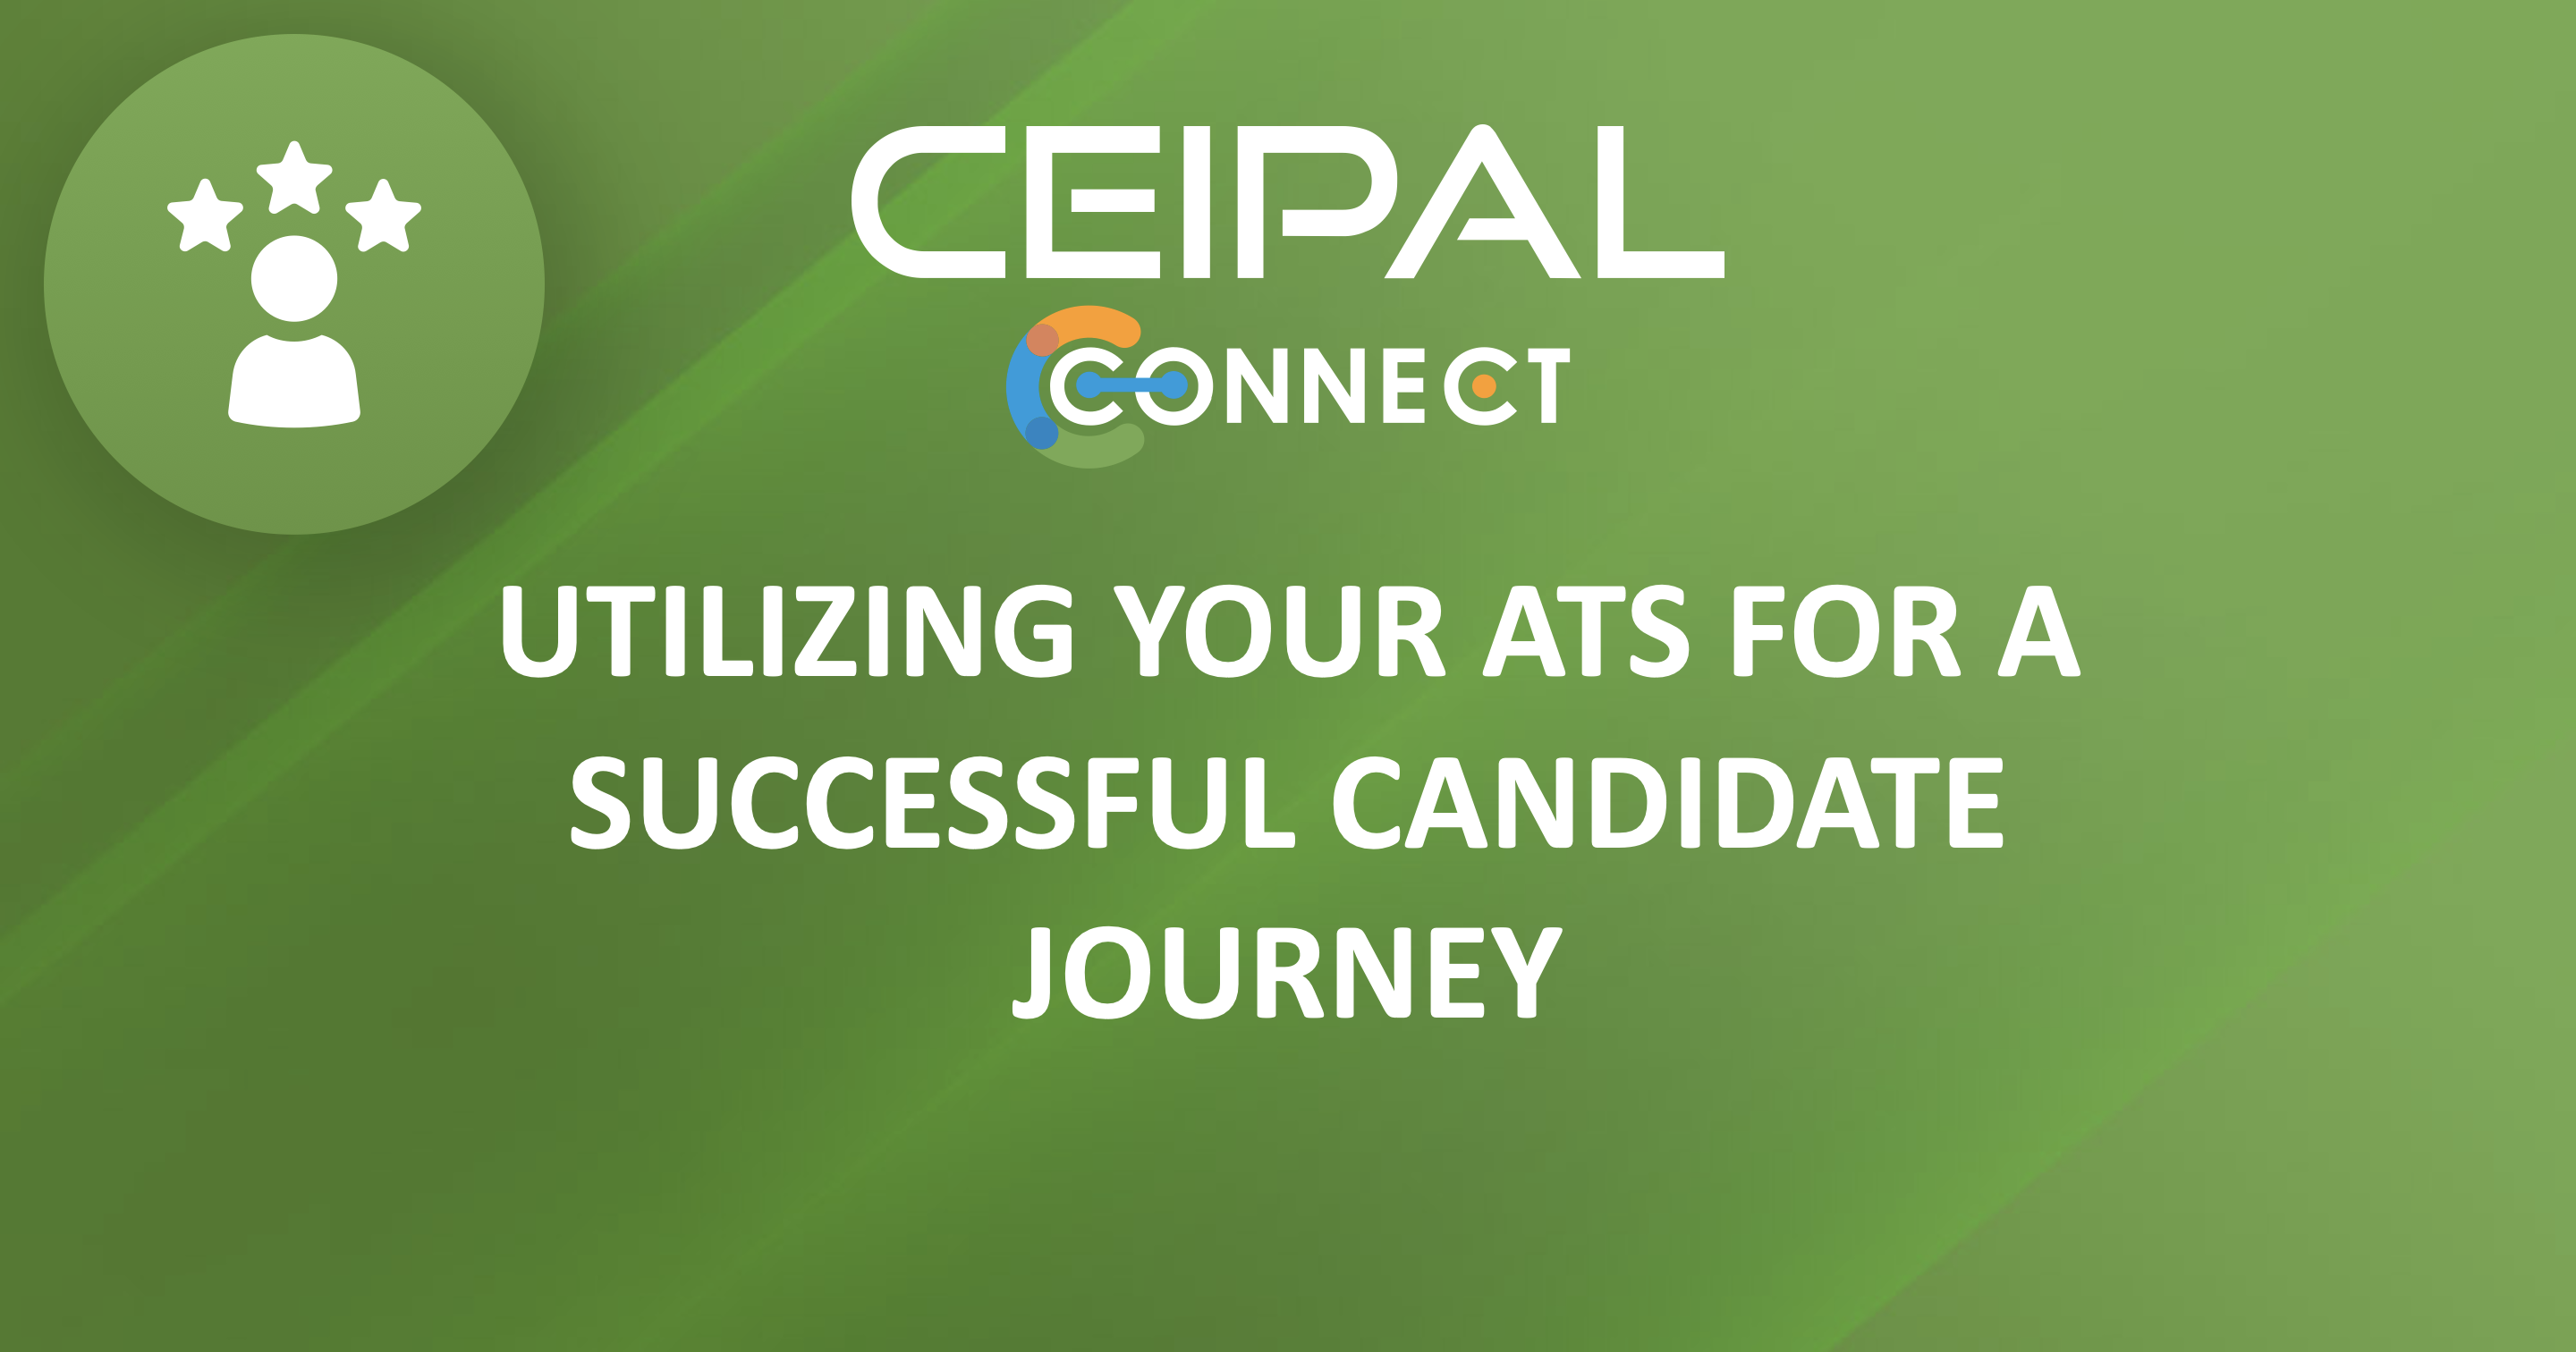 Utilizing Your ATS for a Successful Candidate Journey